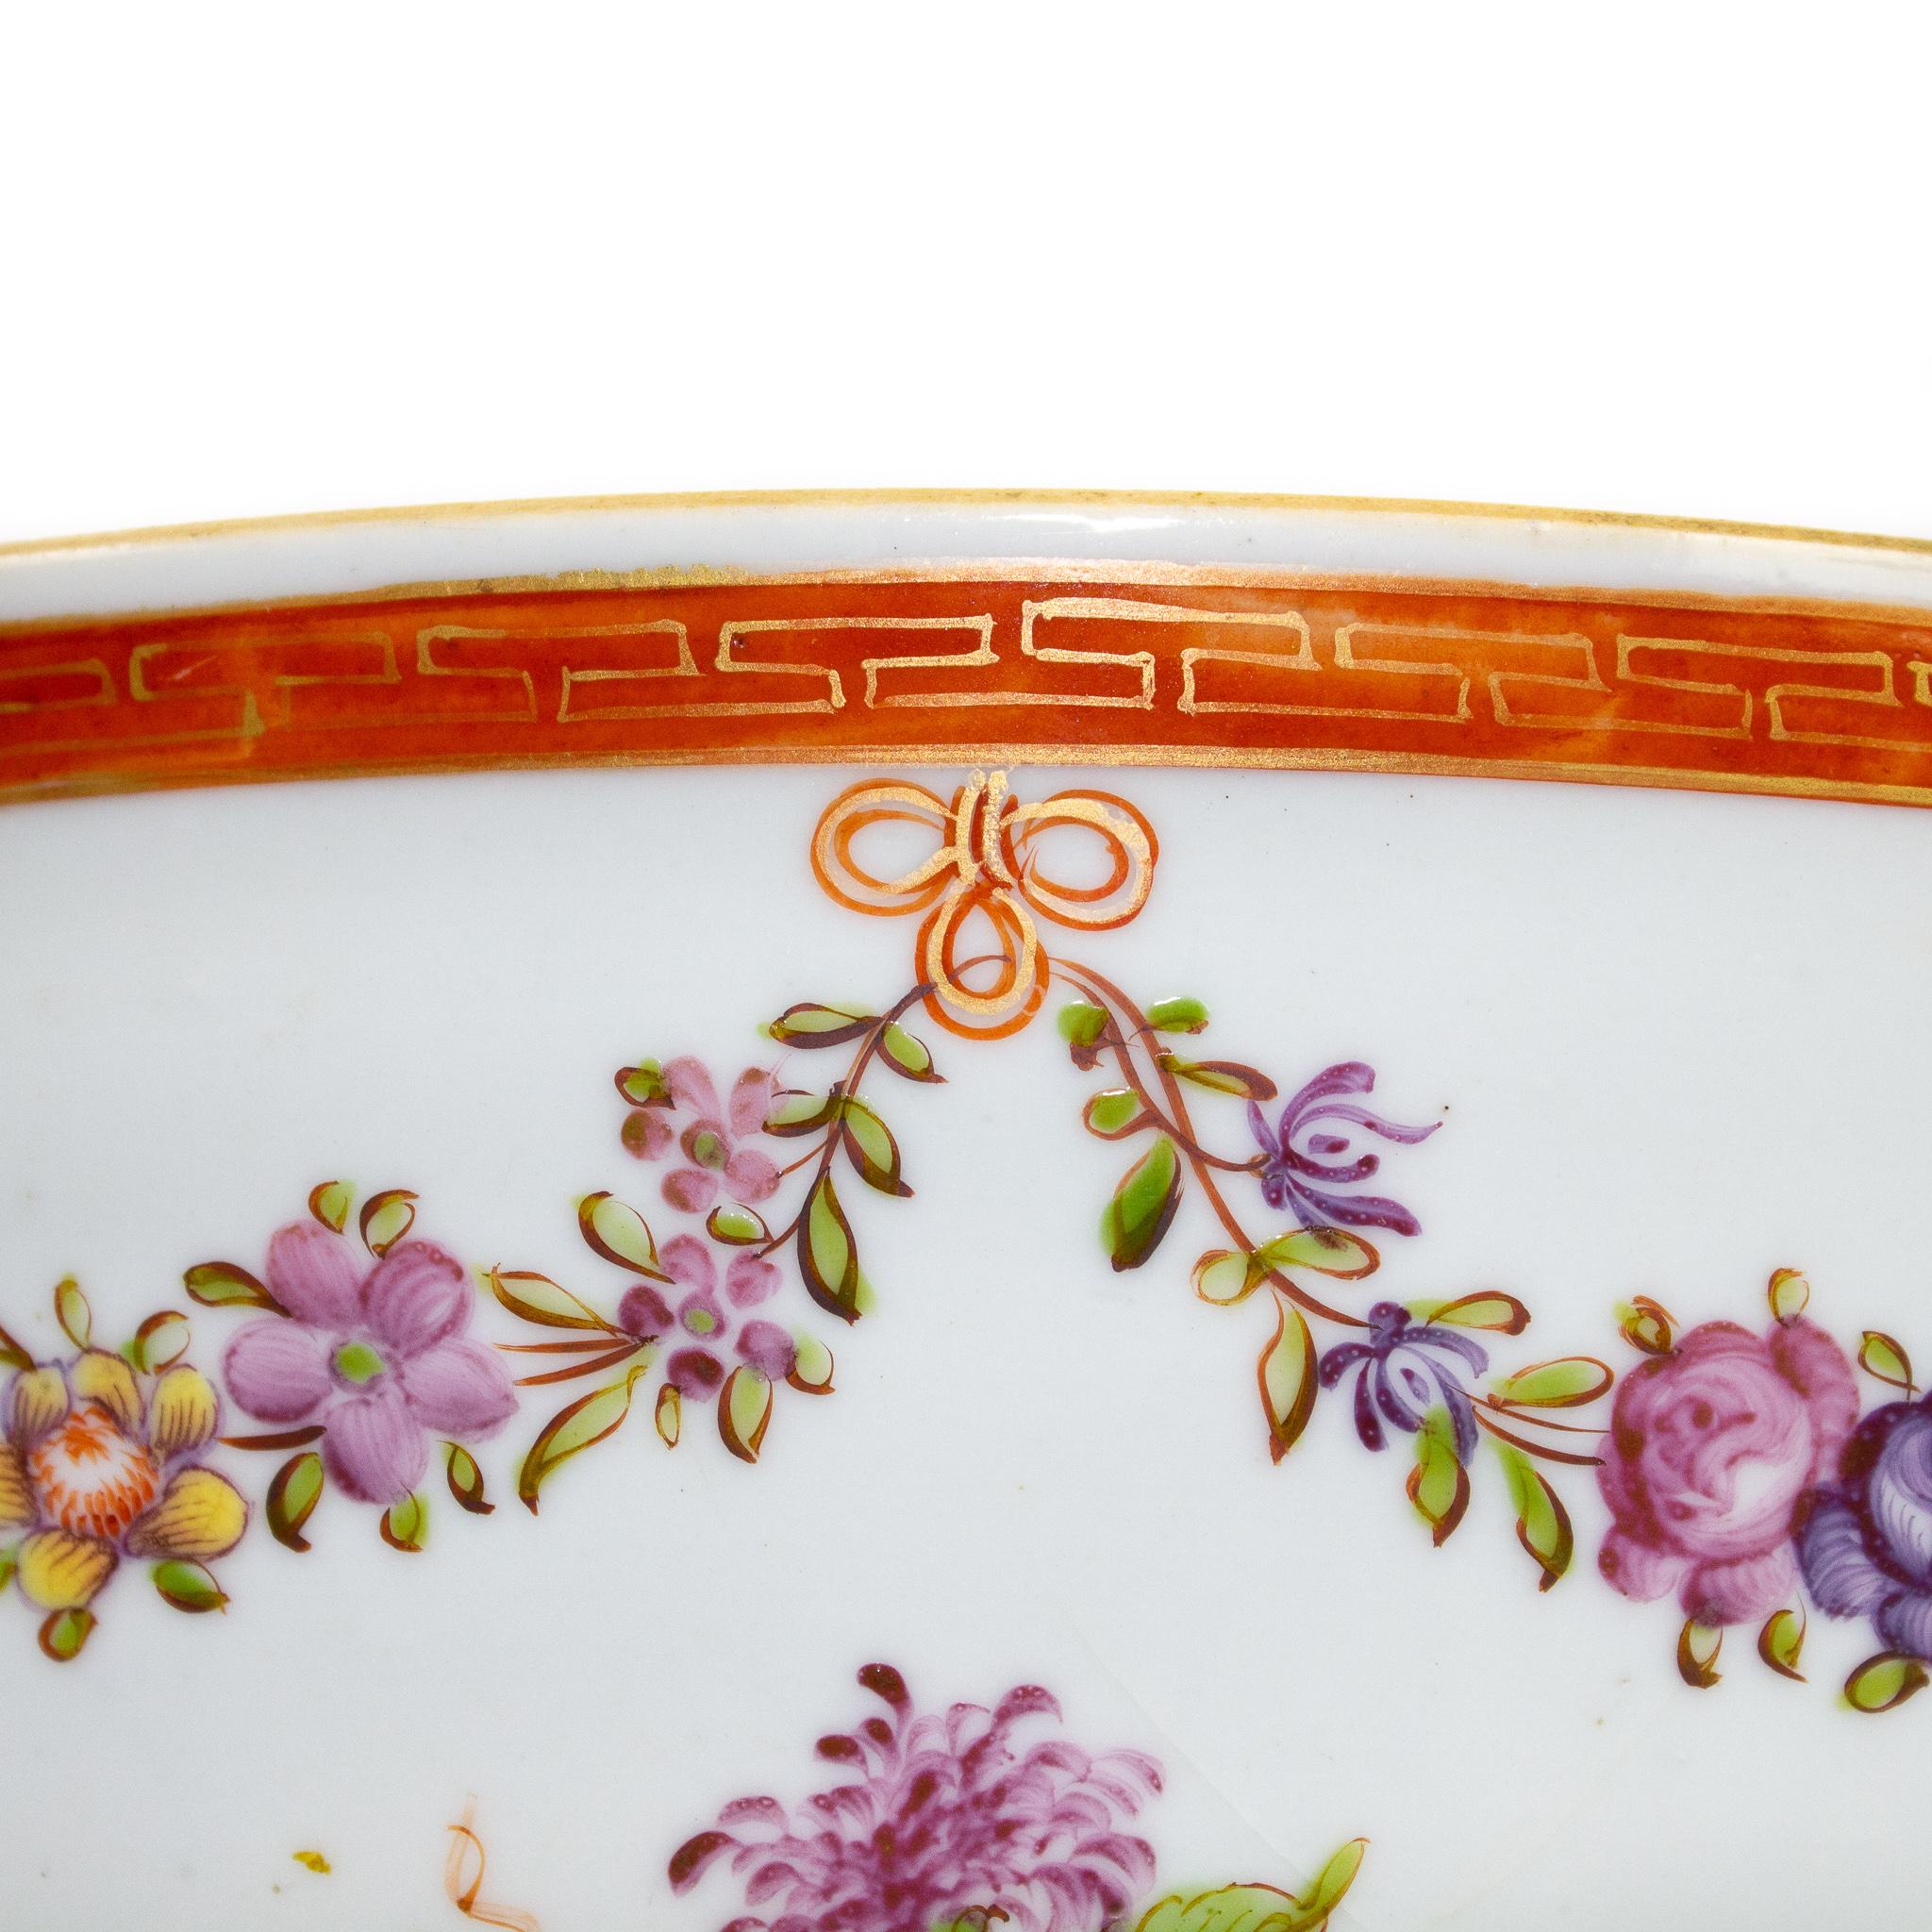 A Chinese Porcelain rounded bowl, India East Company, Qing Dynasty (1644-1912), Qianlong period (1736-1795). Inside, the bowl displays in the centre, a peony and a lotus flower. On the outside, under a frieze with a gilt geometric pattern, it's